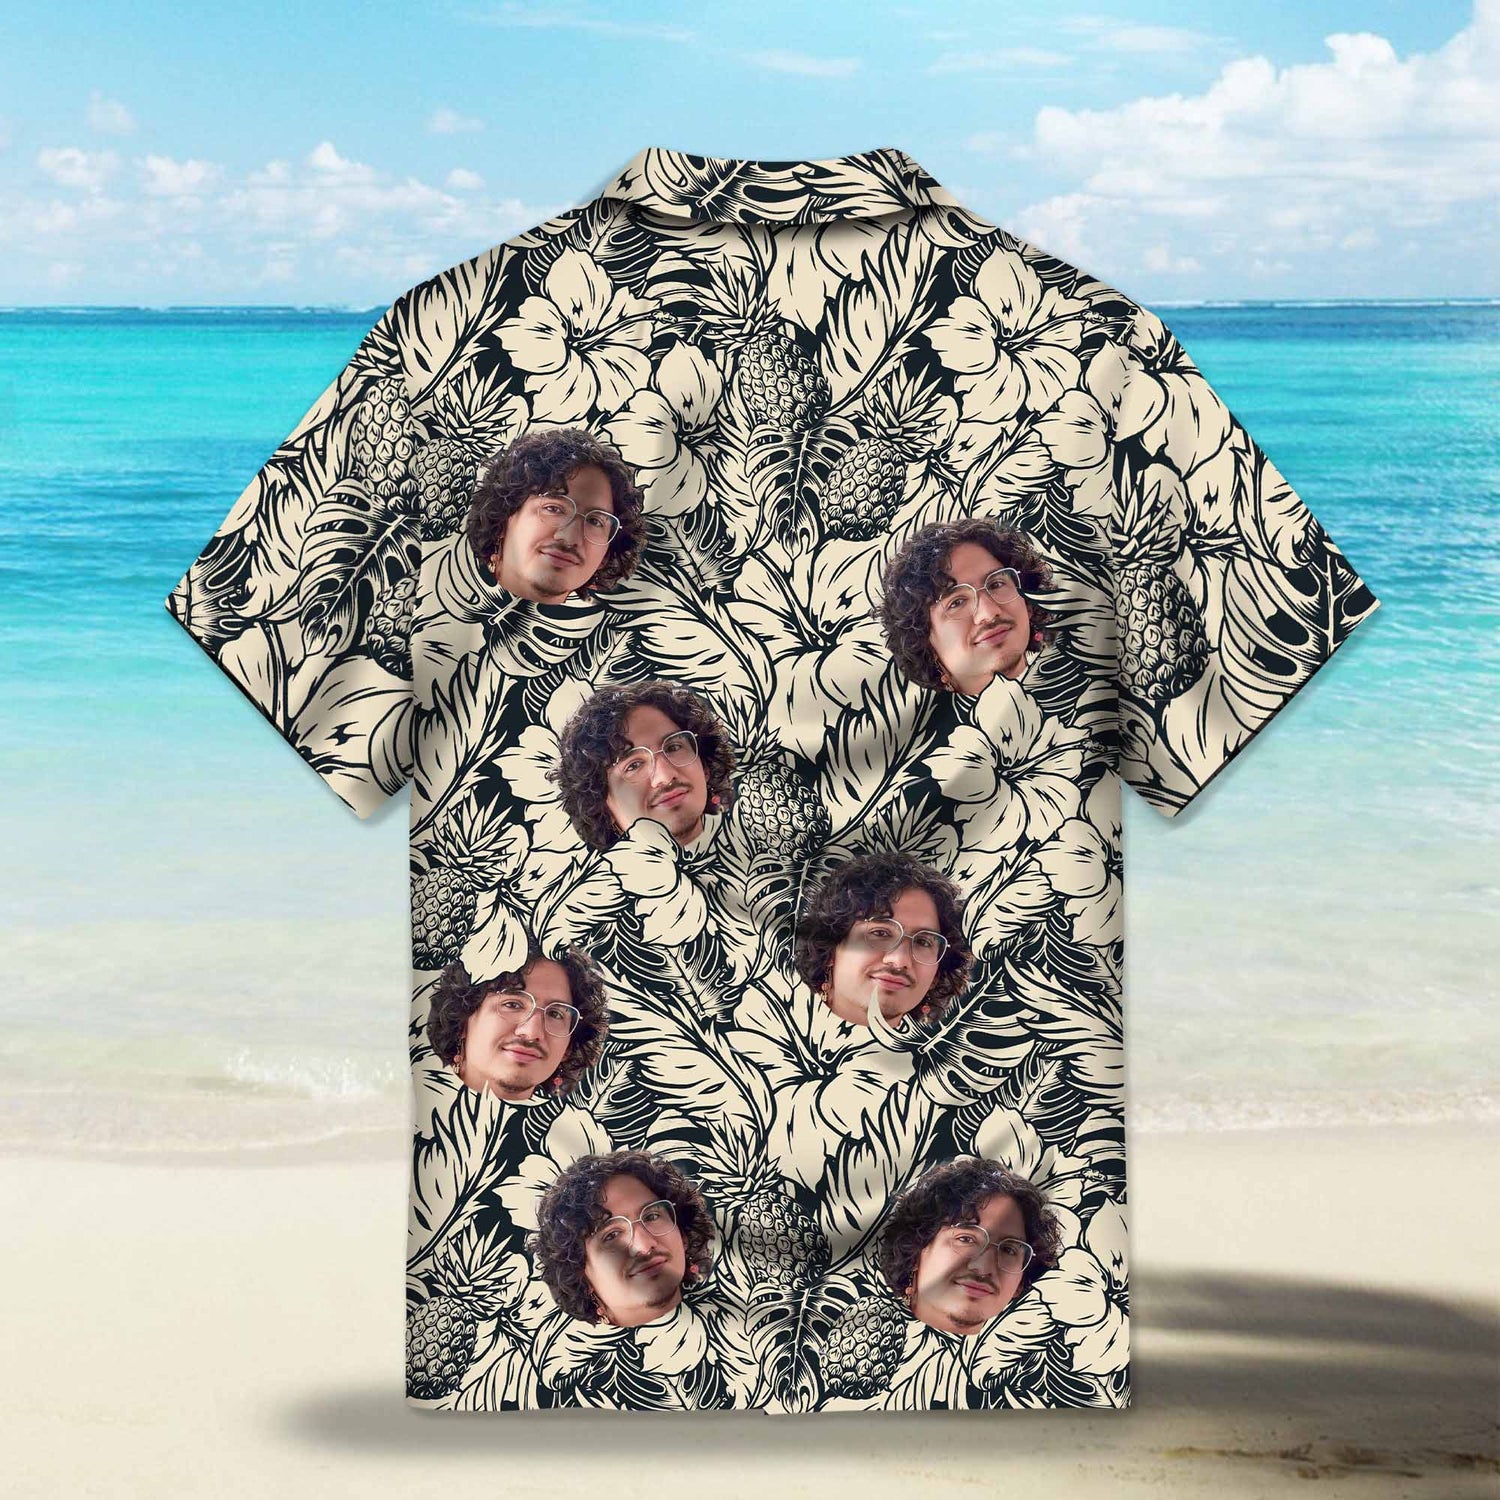 Botanical Tropical Garden in Black and Ivory Custom Hawaiian Shirt. Featuring elegant botanical designs in a monochrome color scheme, perfect for a stylish tropical look.